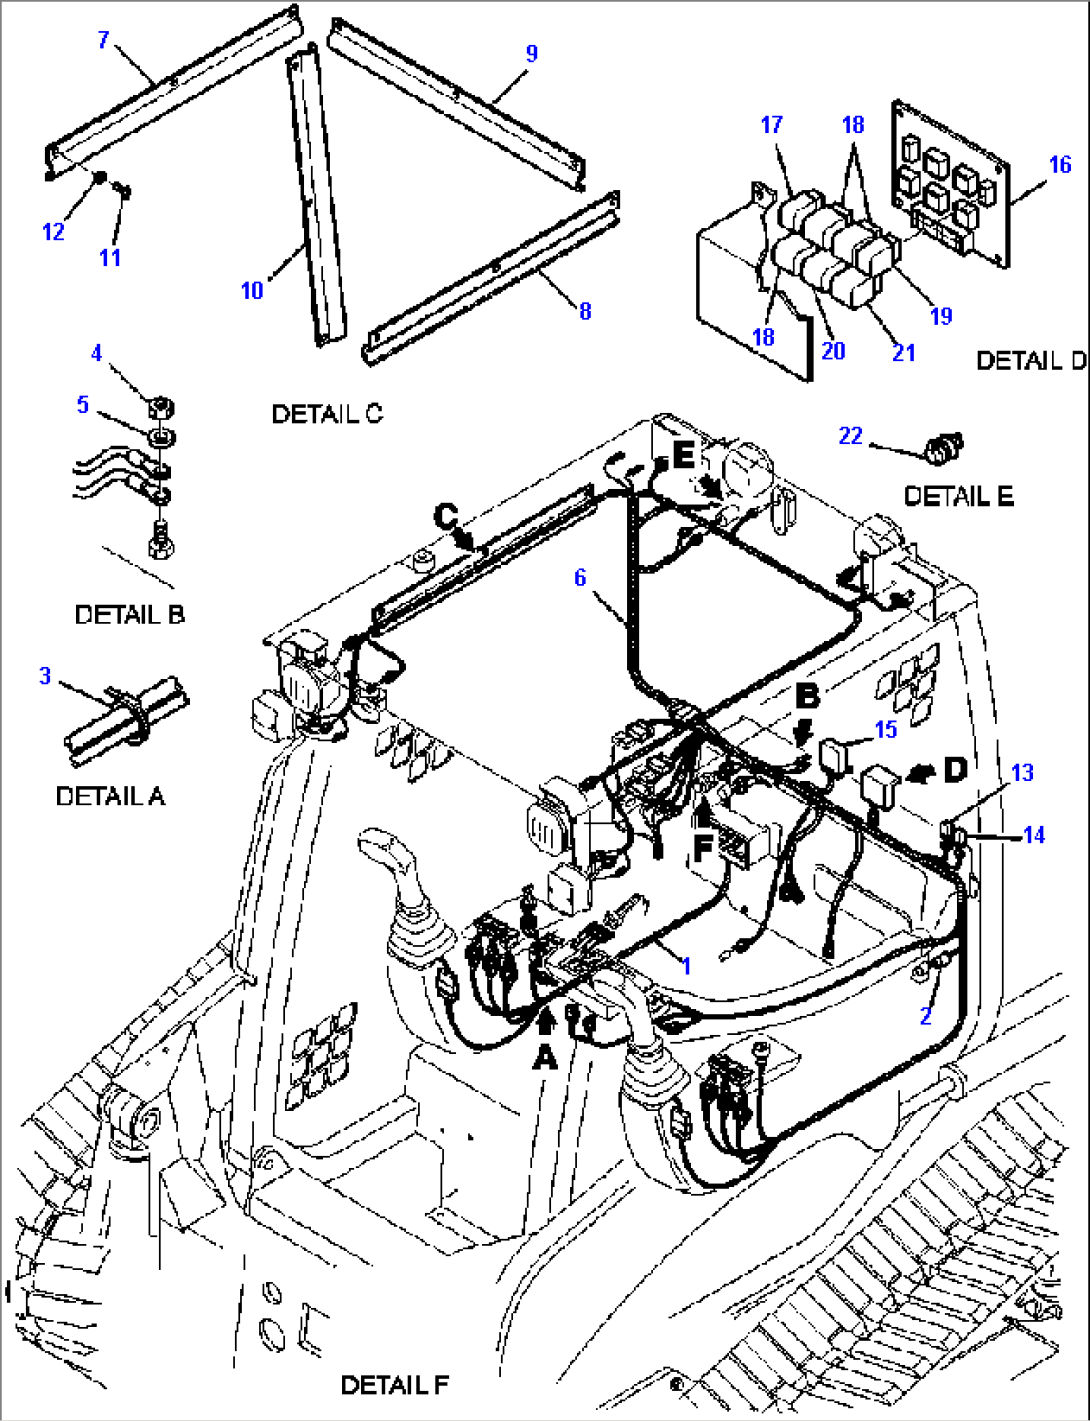 E0290-1500 ELECTRICAL SYSTEM (1/4)